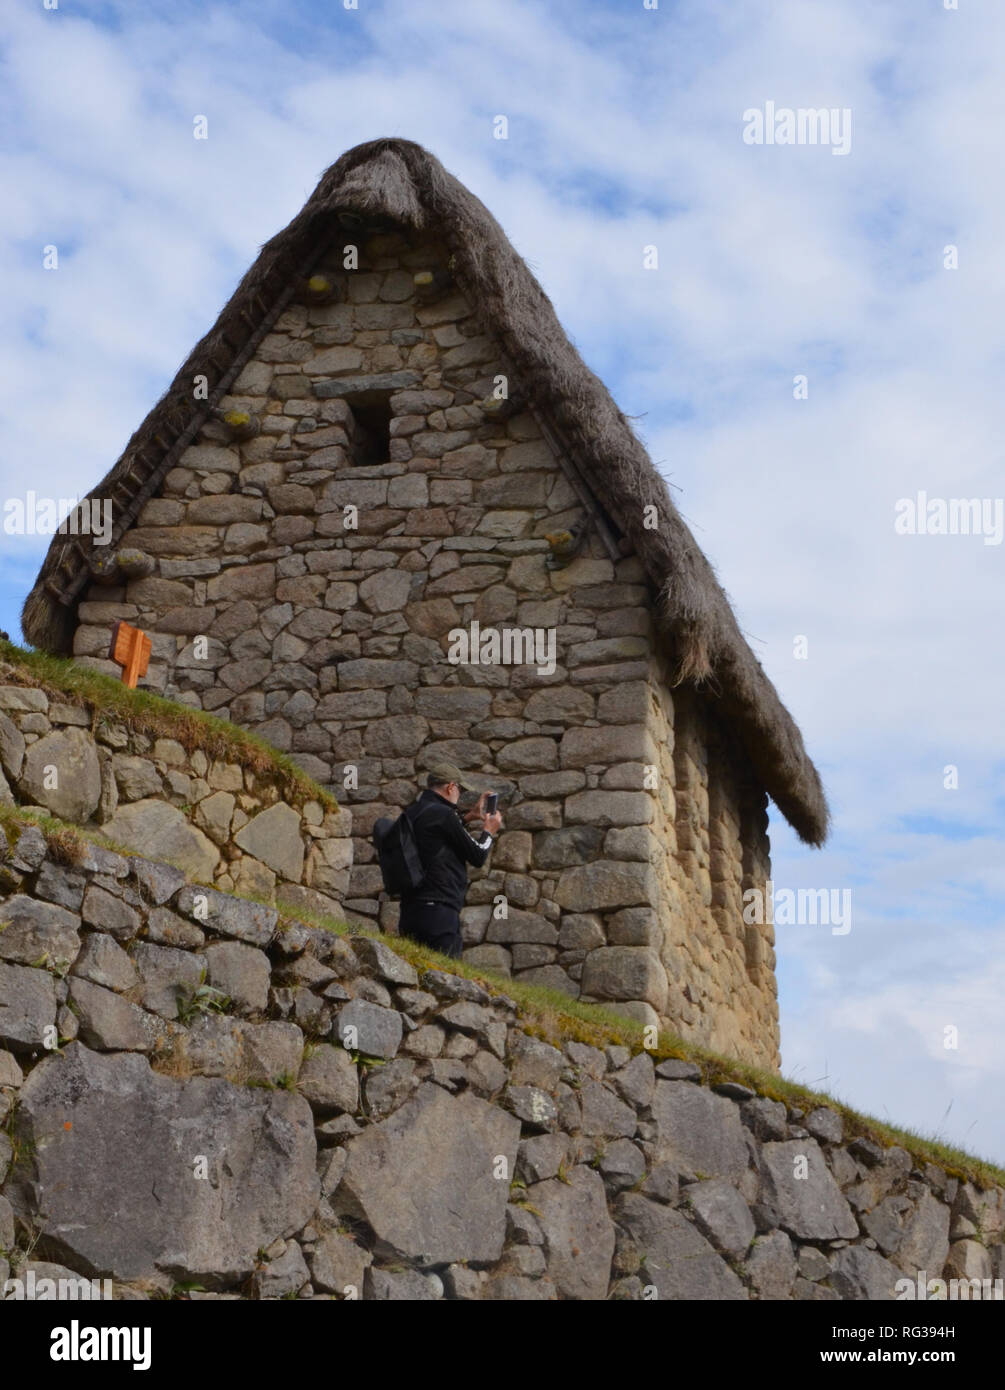 MACHU PICCHU / PERU, August 16, 2018: A tourist takes a photography from behind guardhouse in Machu Picchu ruins Stock Photo